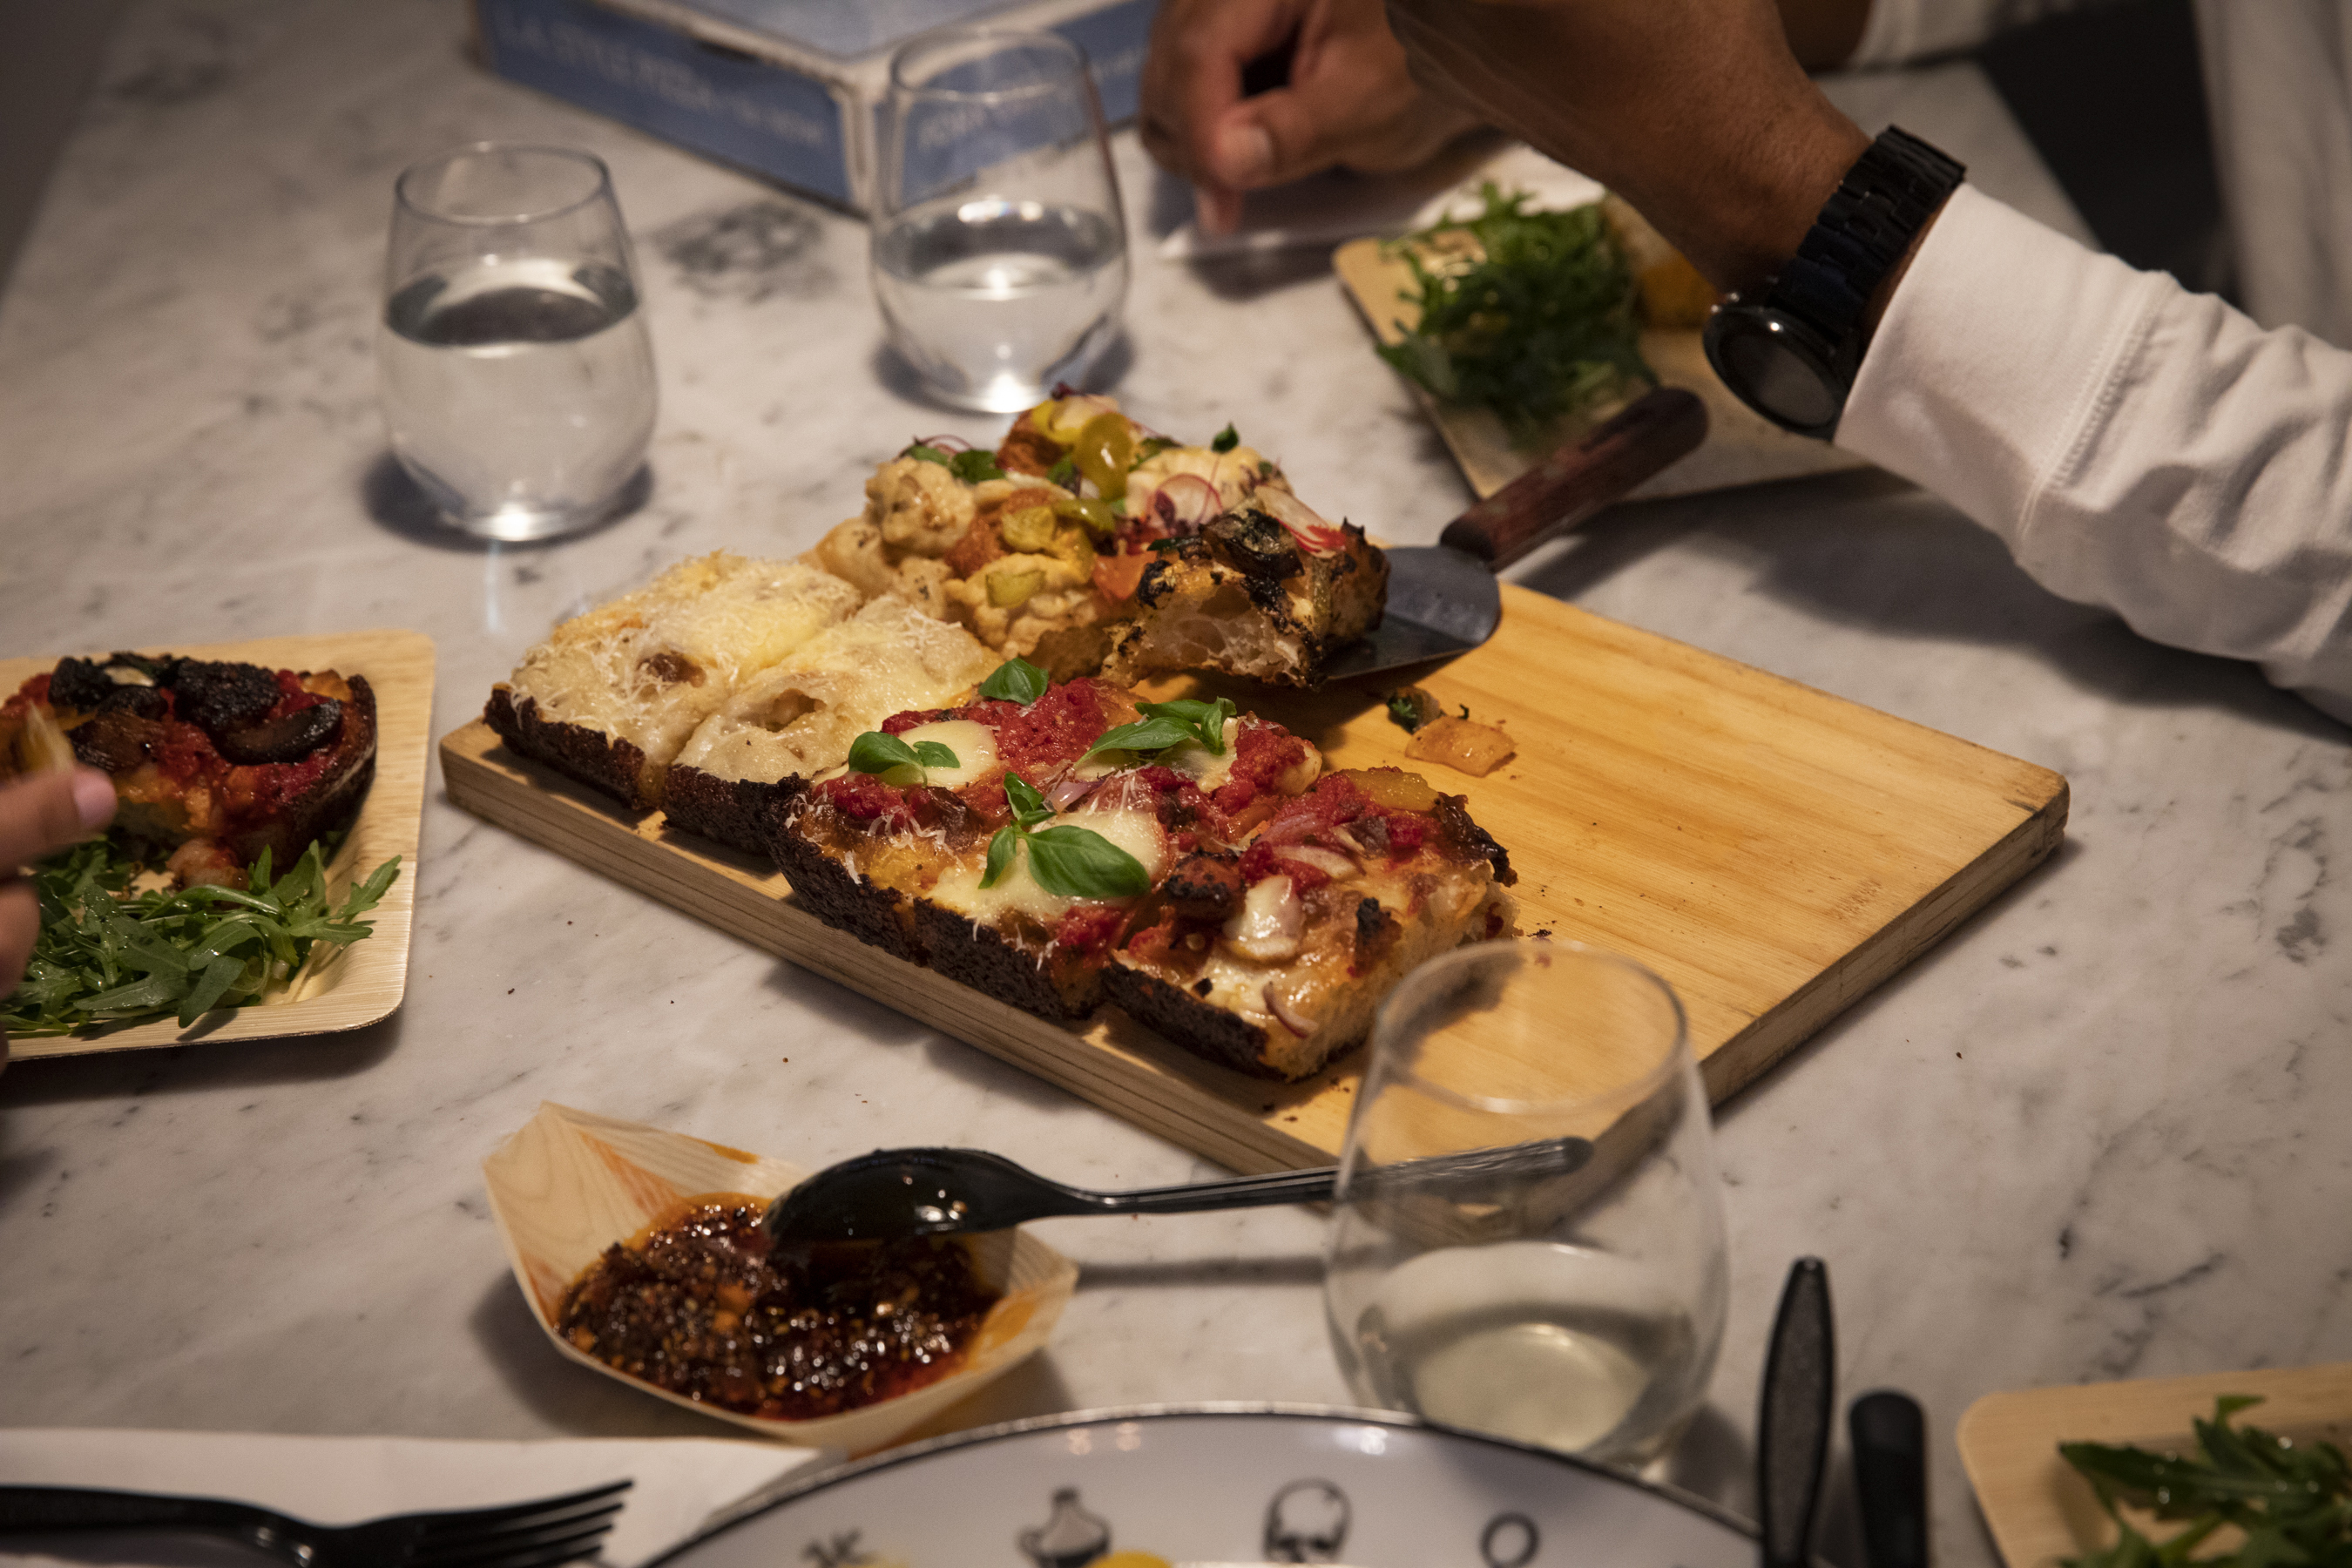 An evening over a pizza on a cutting board with sides around.